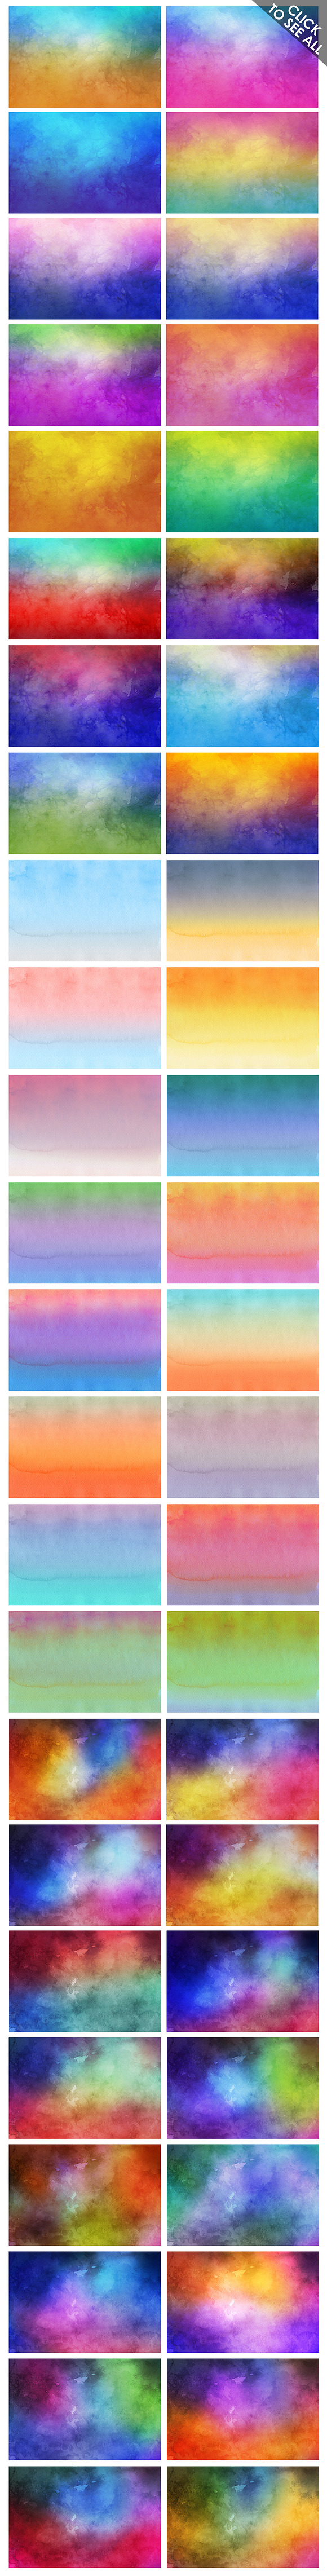 50%OFF*48 Watercolor Backgrounds in Textures - product preview 4